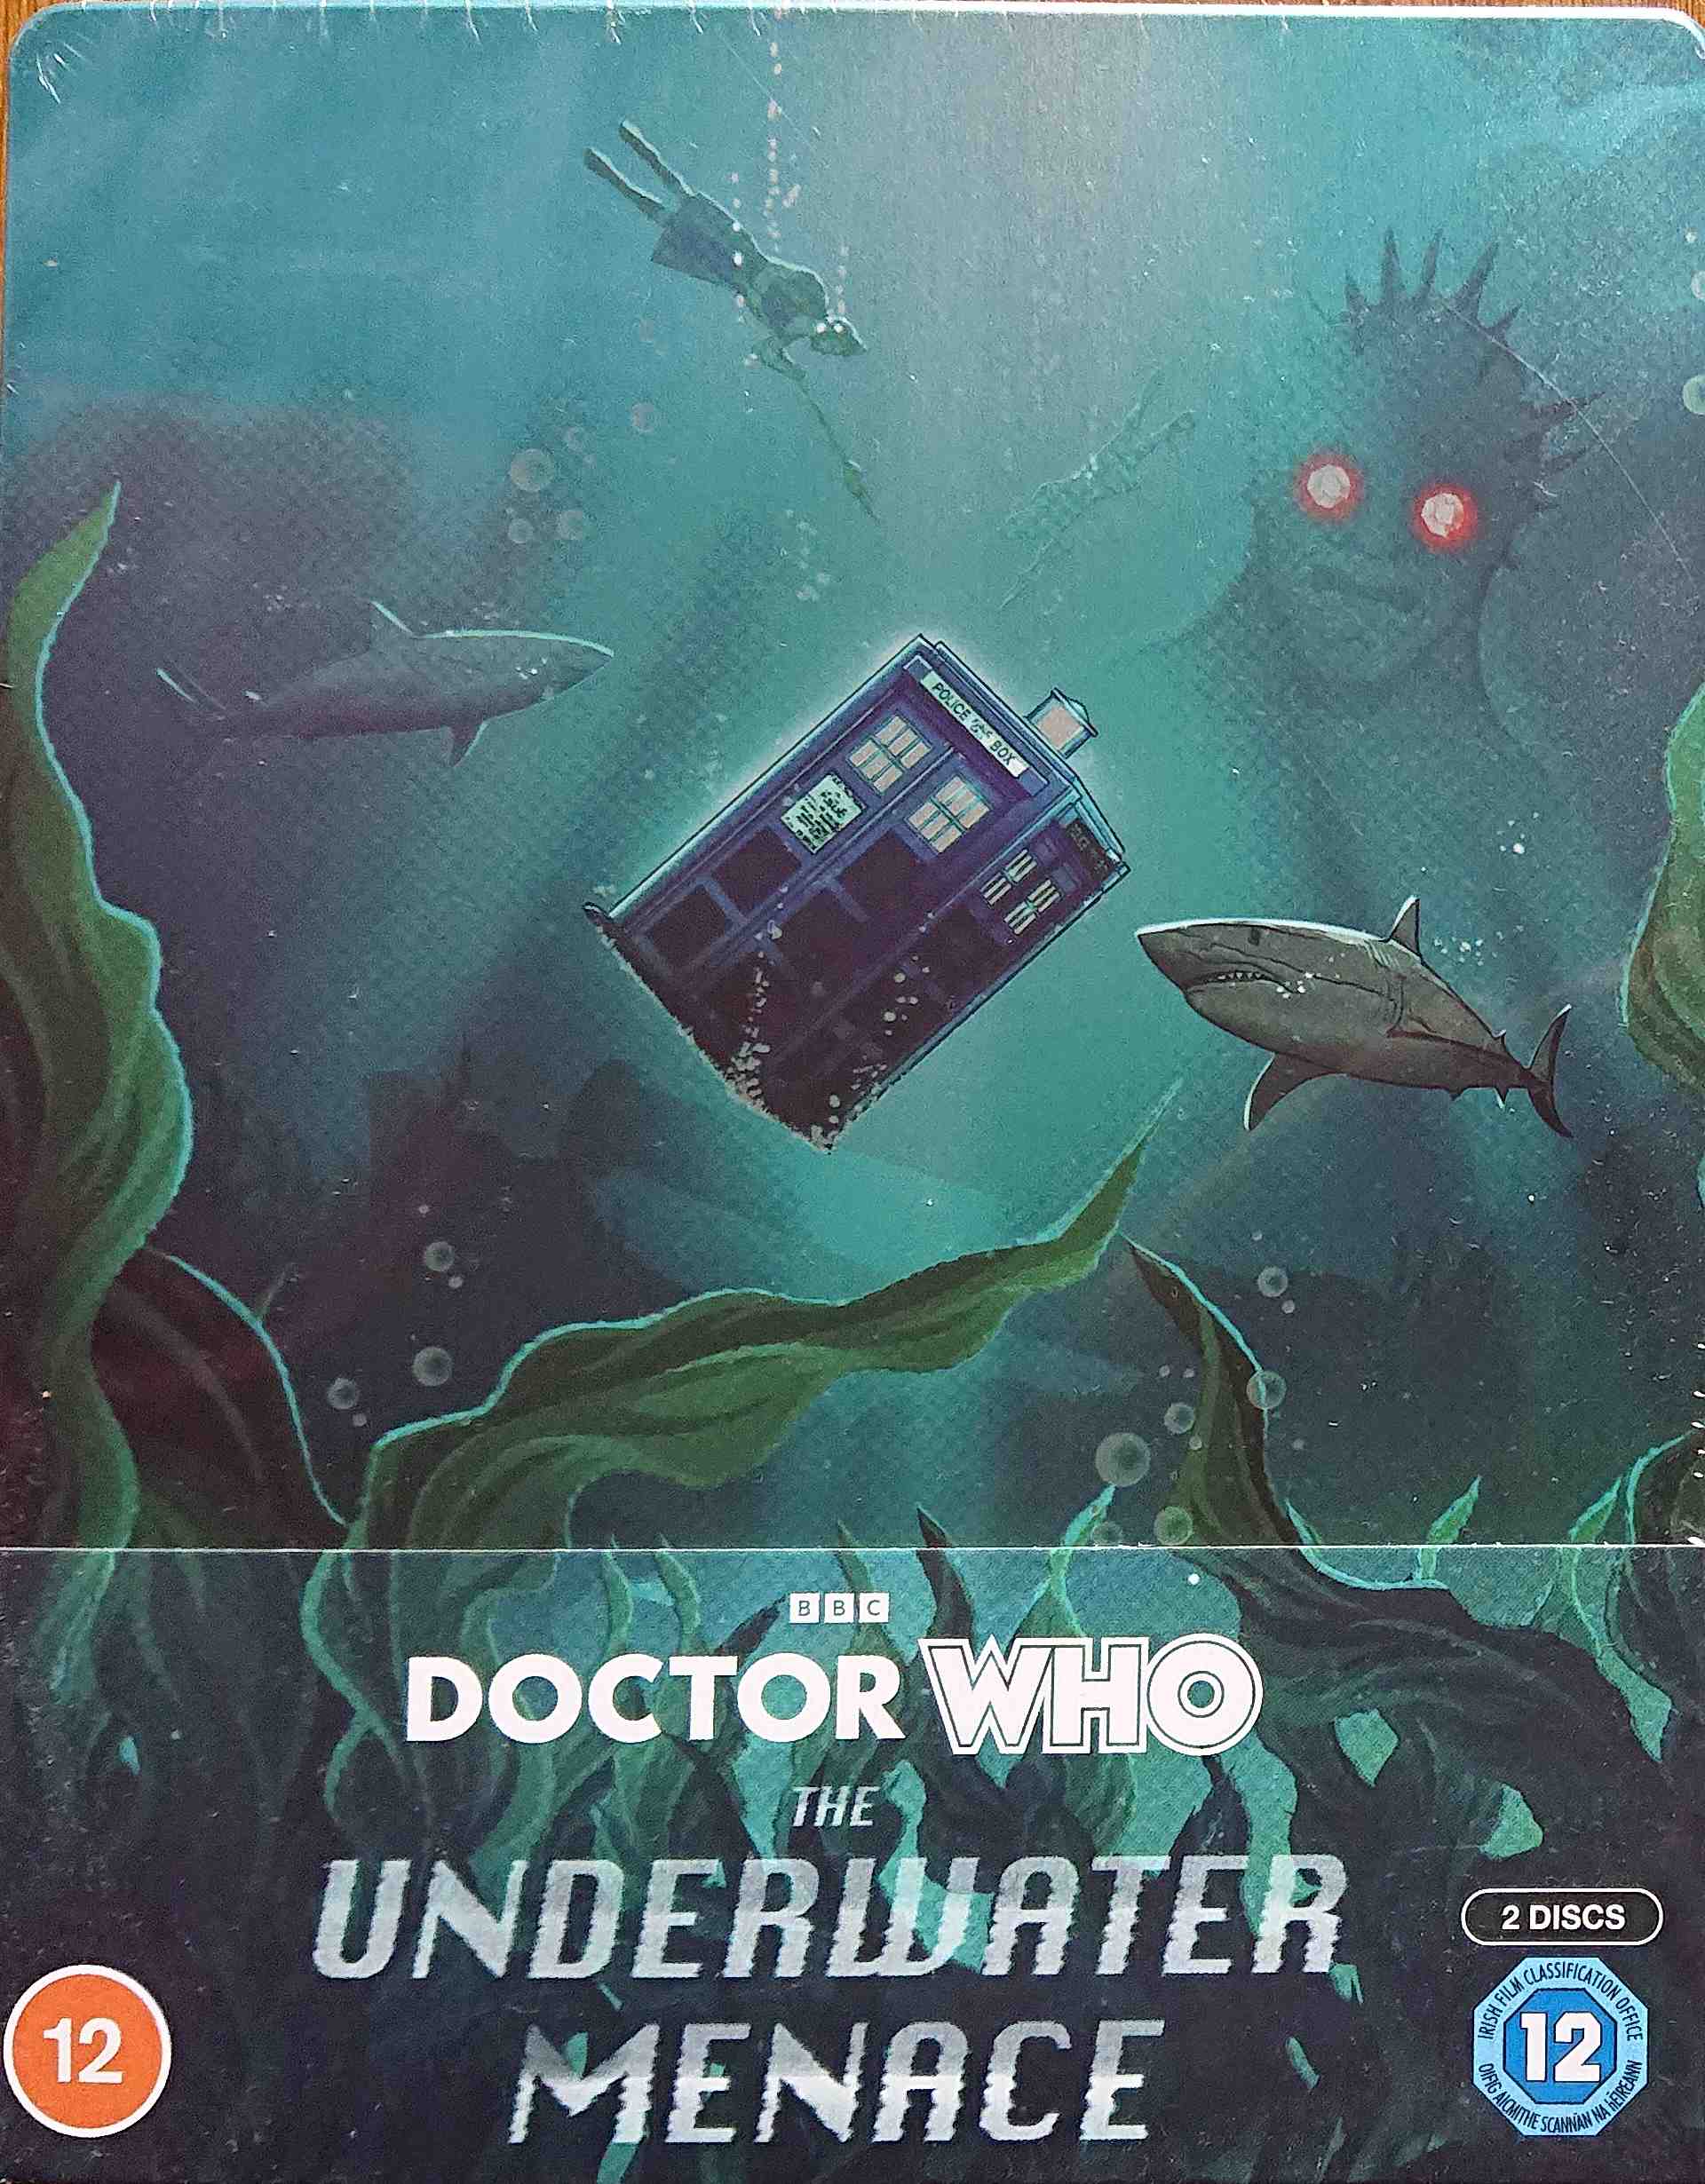 Picture of BBCBD 0578 Doctor Who - The underwater menace by artist Geoffrey Orme from the BBC records and Tapes library